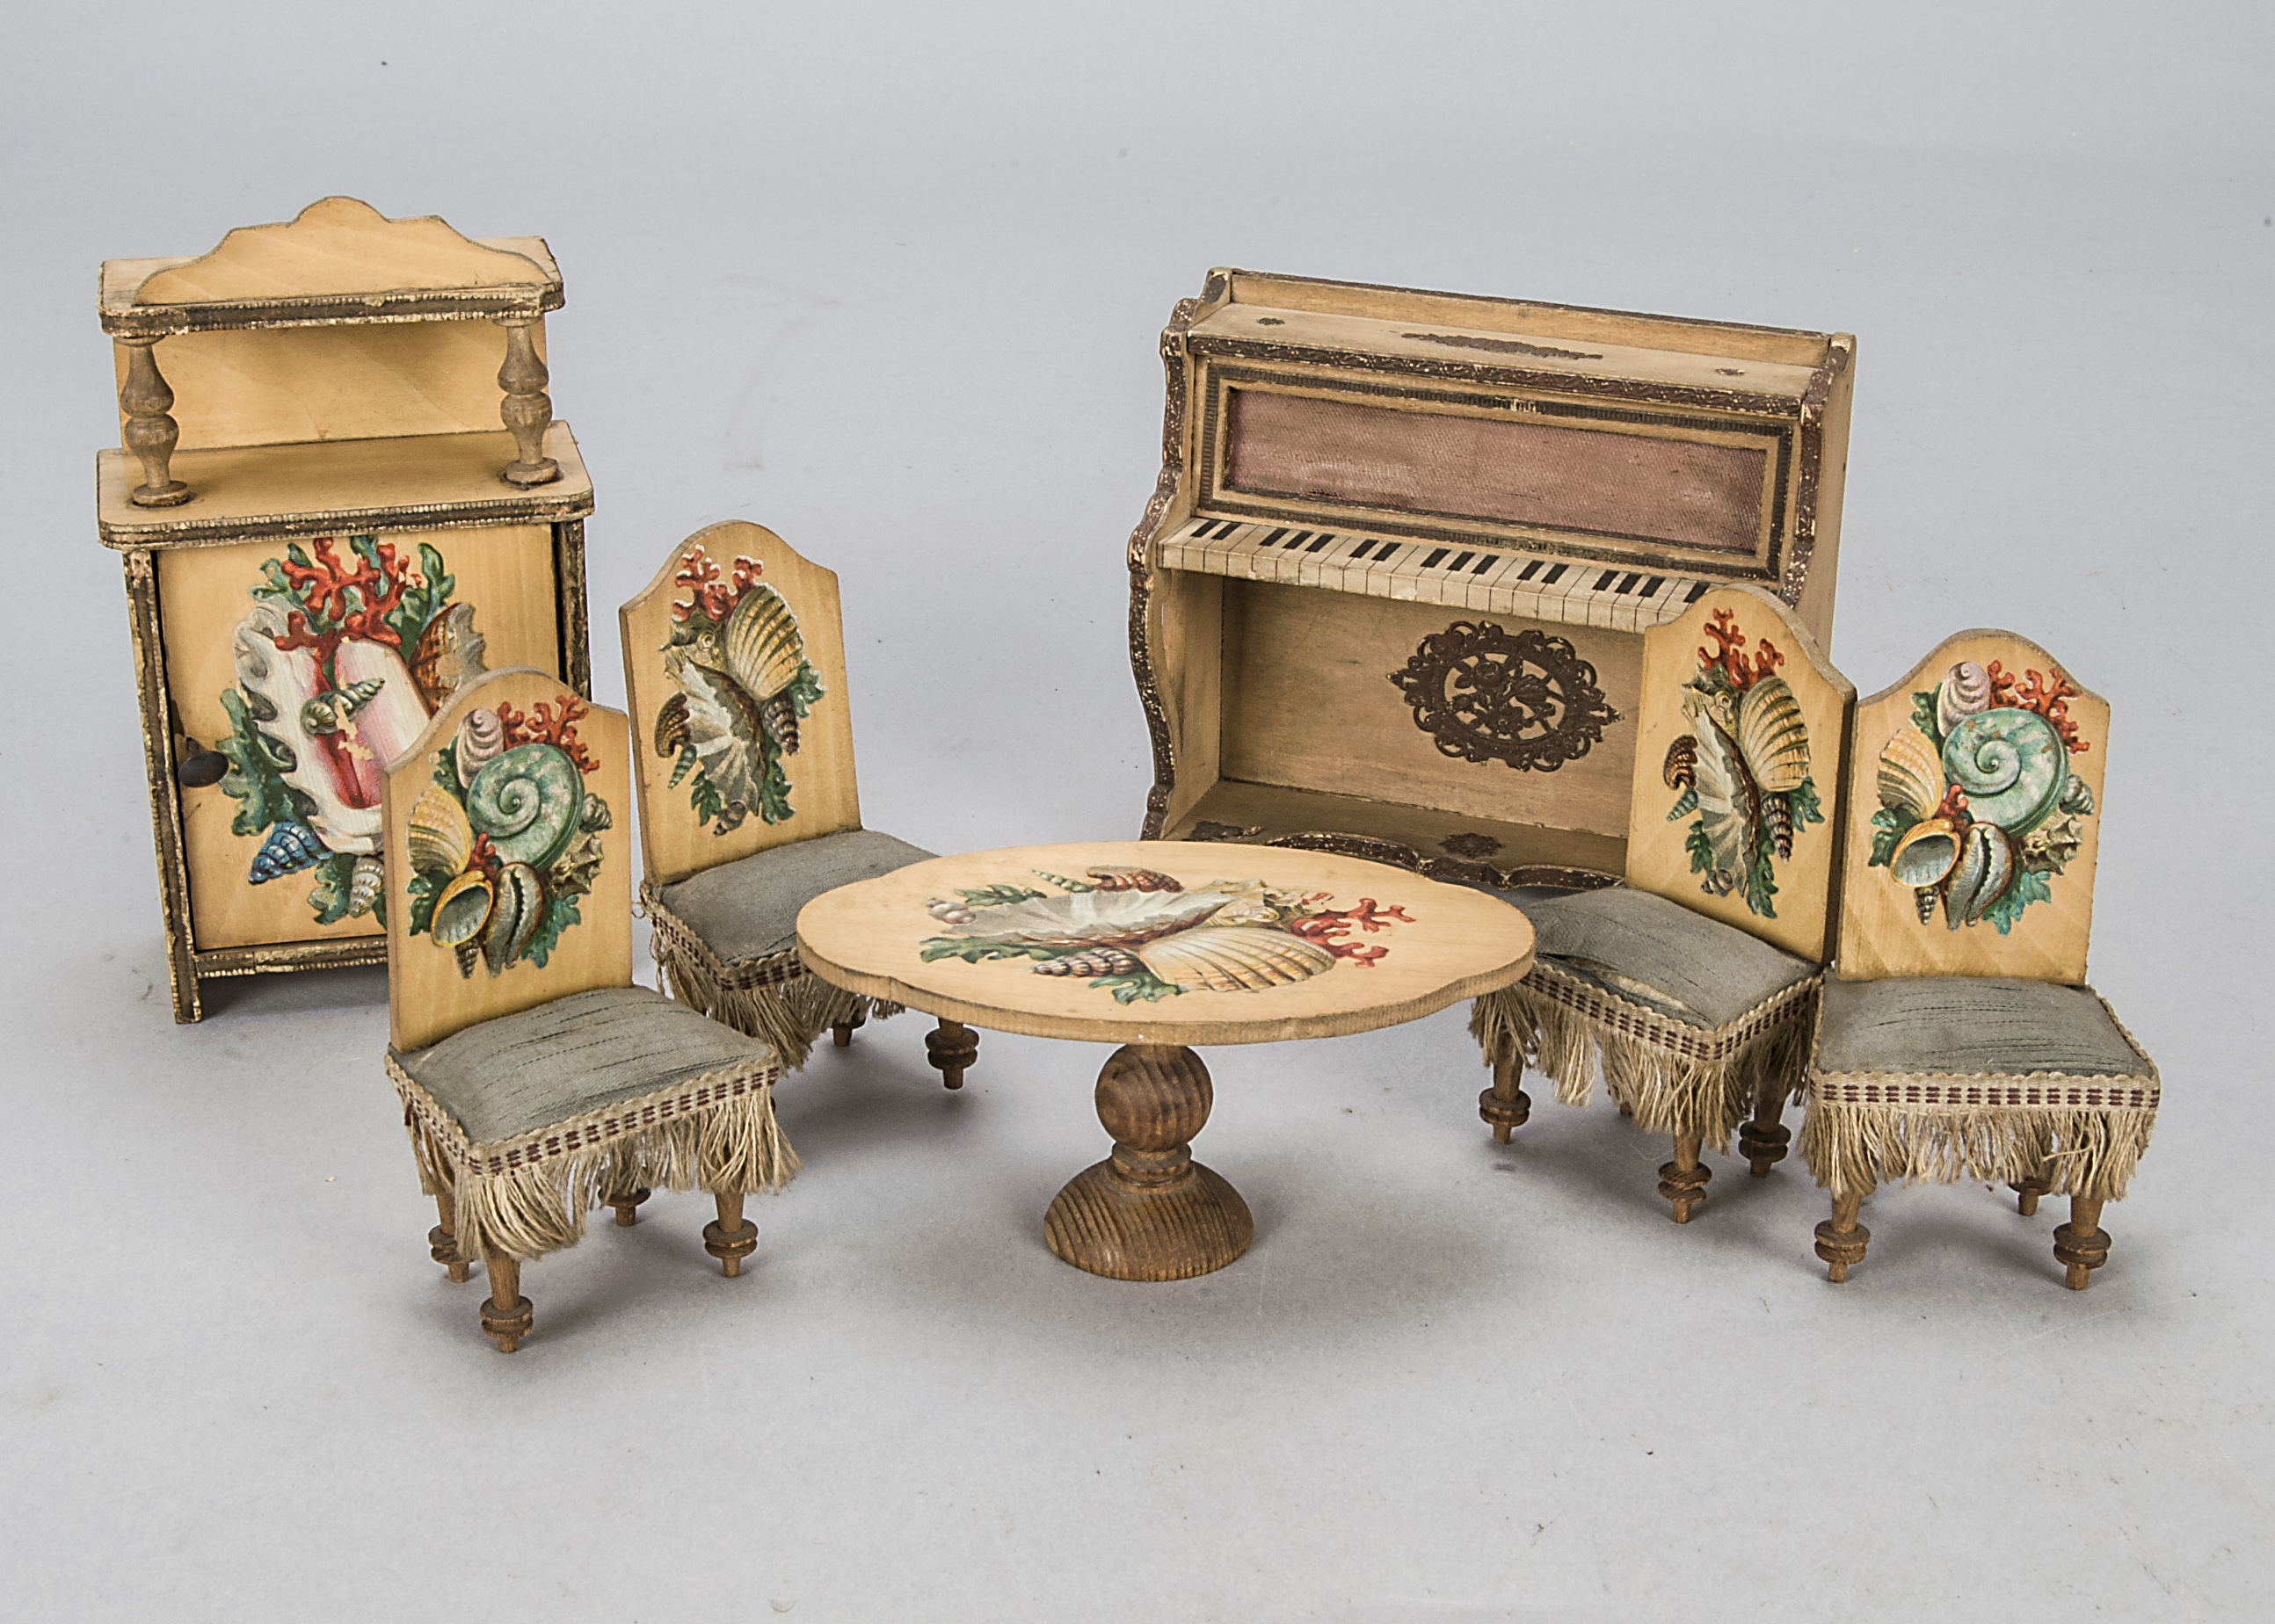 Rare German chromolithographic transfer decorated dolls’ house furniture, blonde wood with lustre